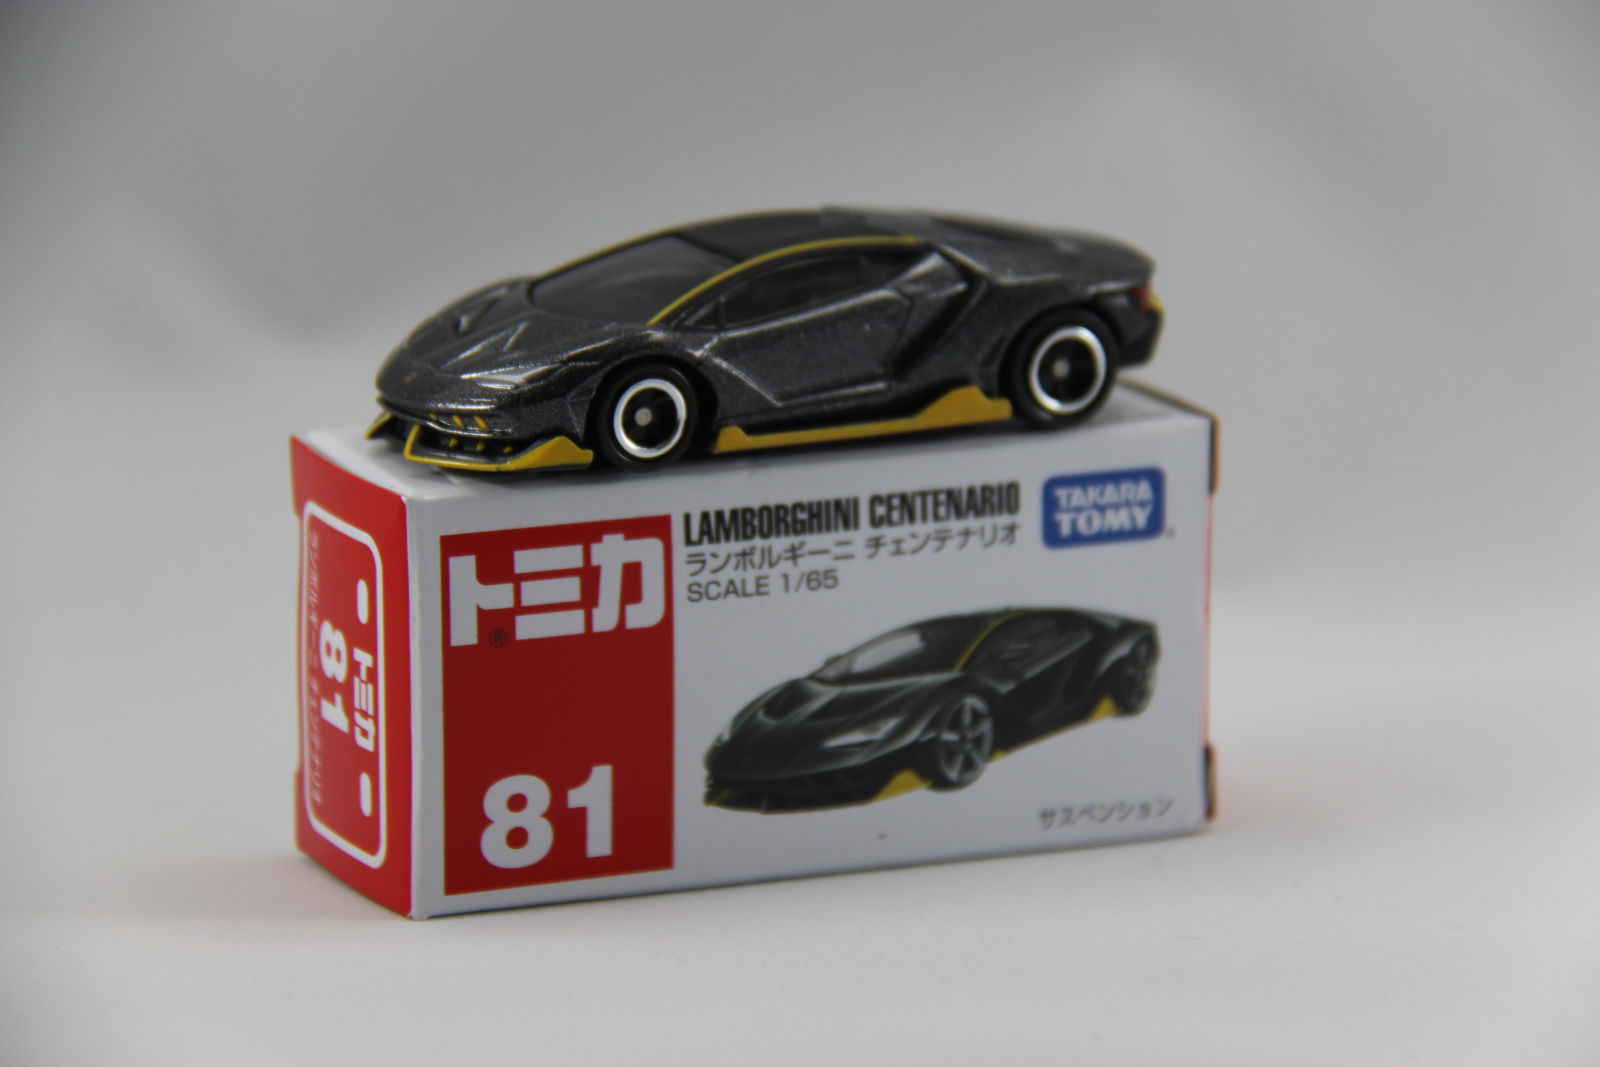 She was like, “I want to buy you a Lamborghini though!” So, into the basket went a Centenario because it’s the only 1/64th one out there yet!